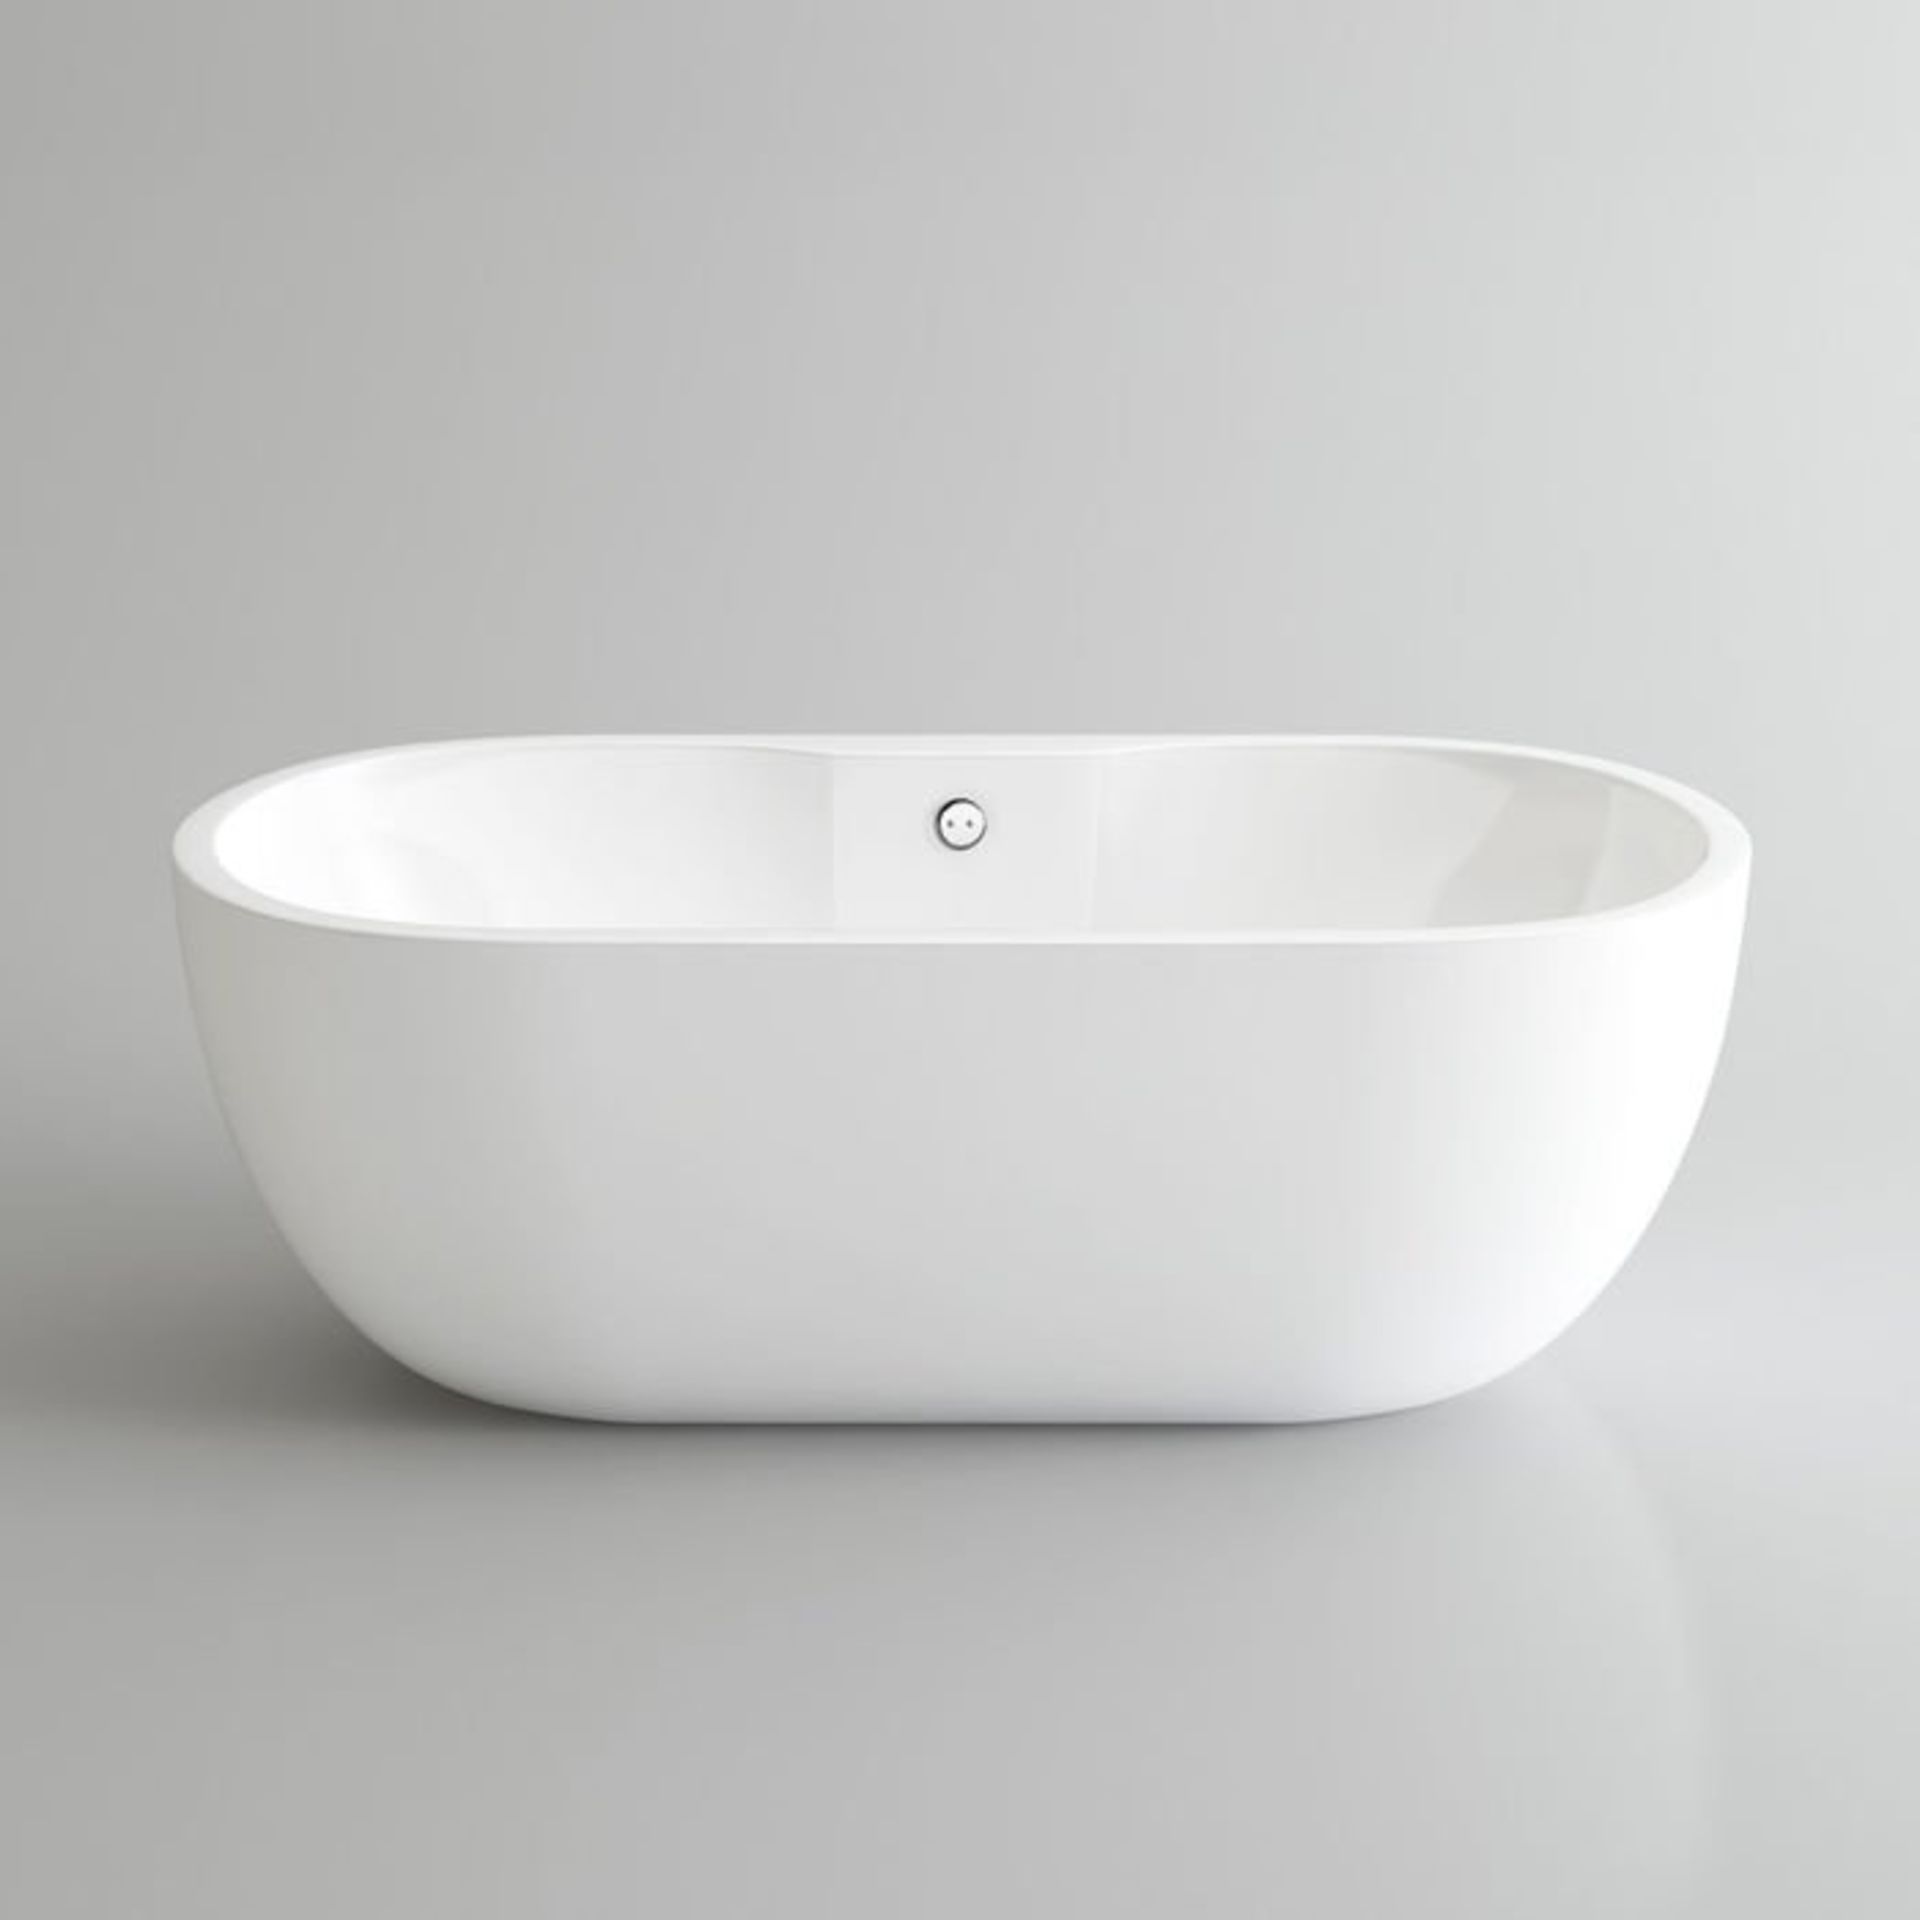 (S5) 1655x750mm Melissa Freestanding Bath - Large. Showcasing contemporary clean lines for a - Image 3 of 3